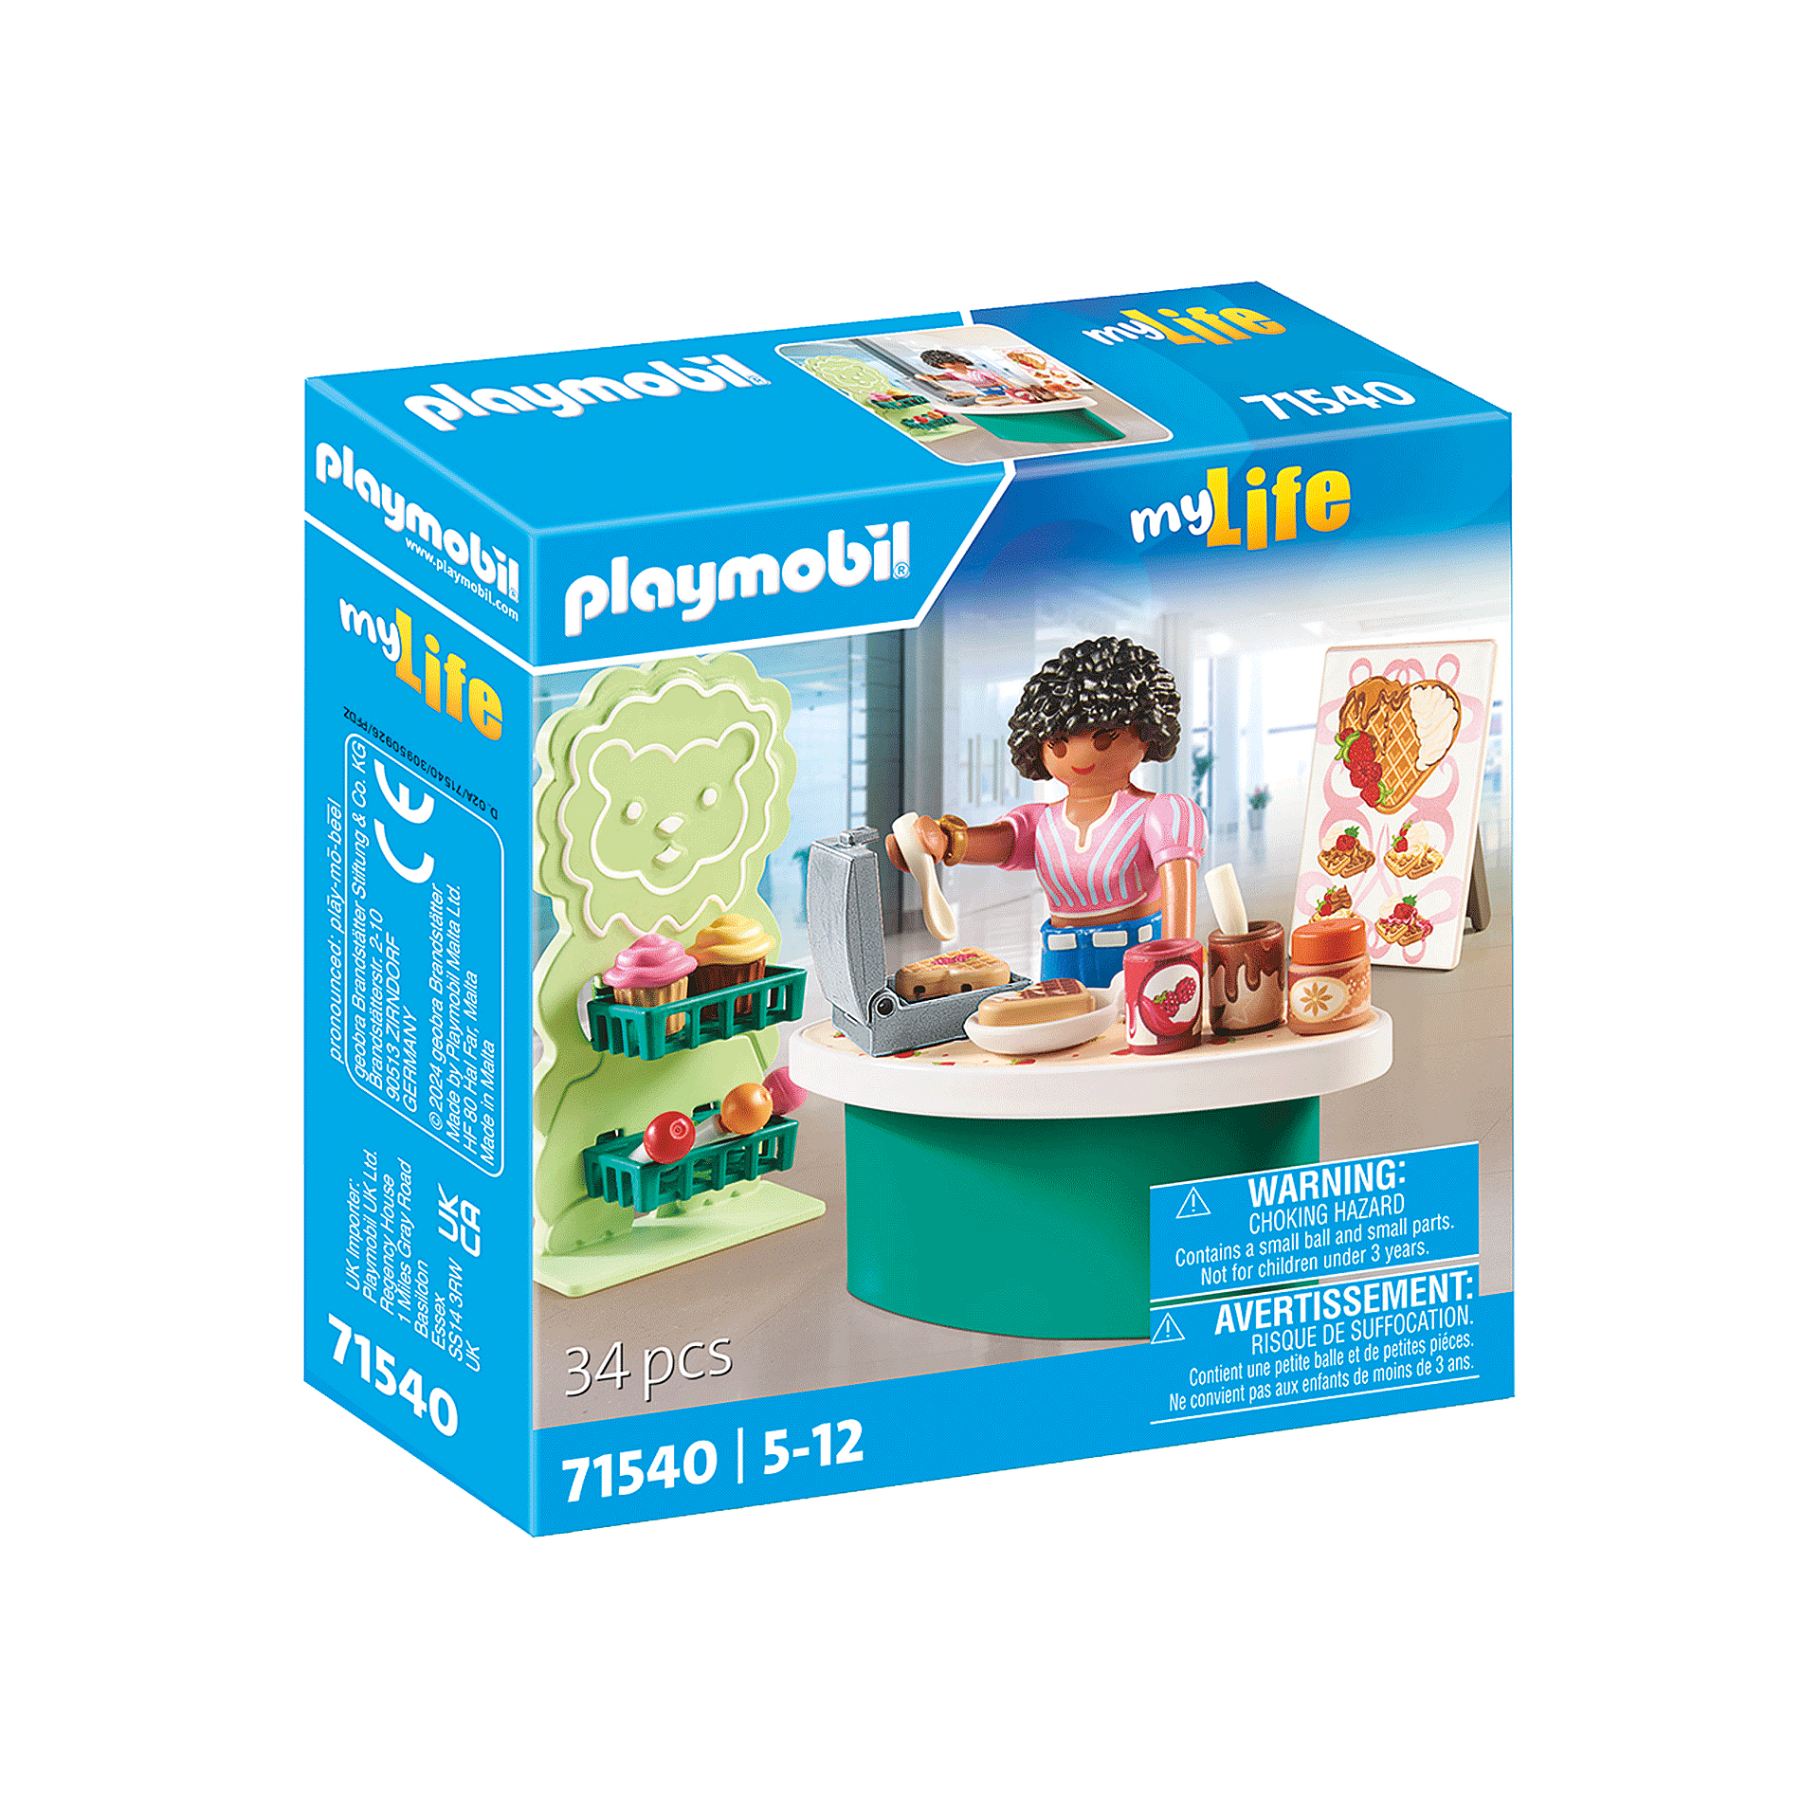 Playmobil Serie - Sweets stand